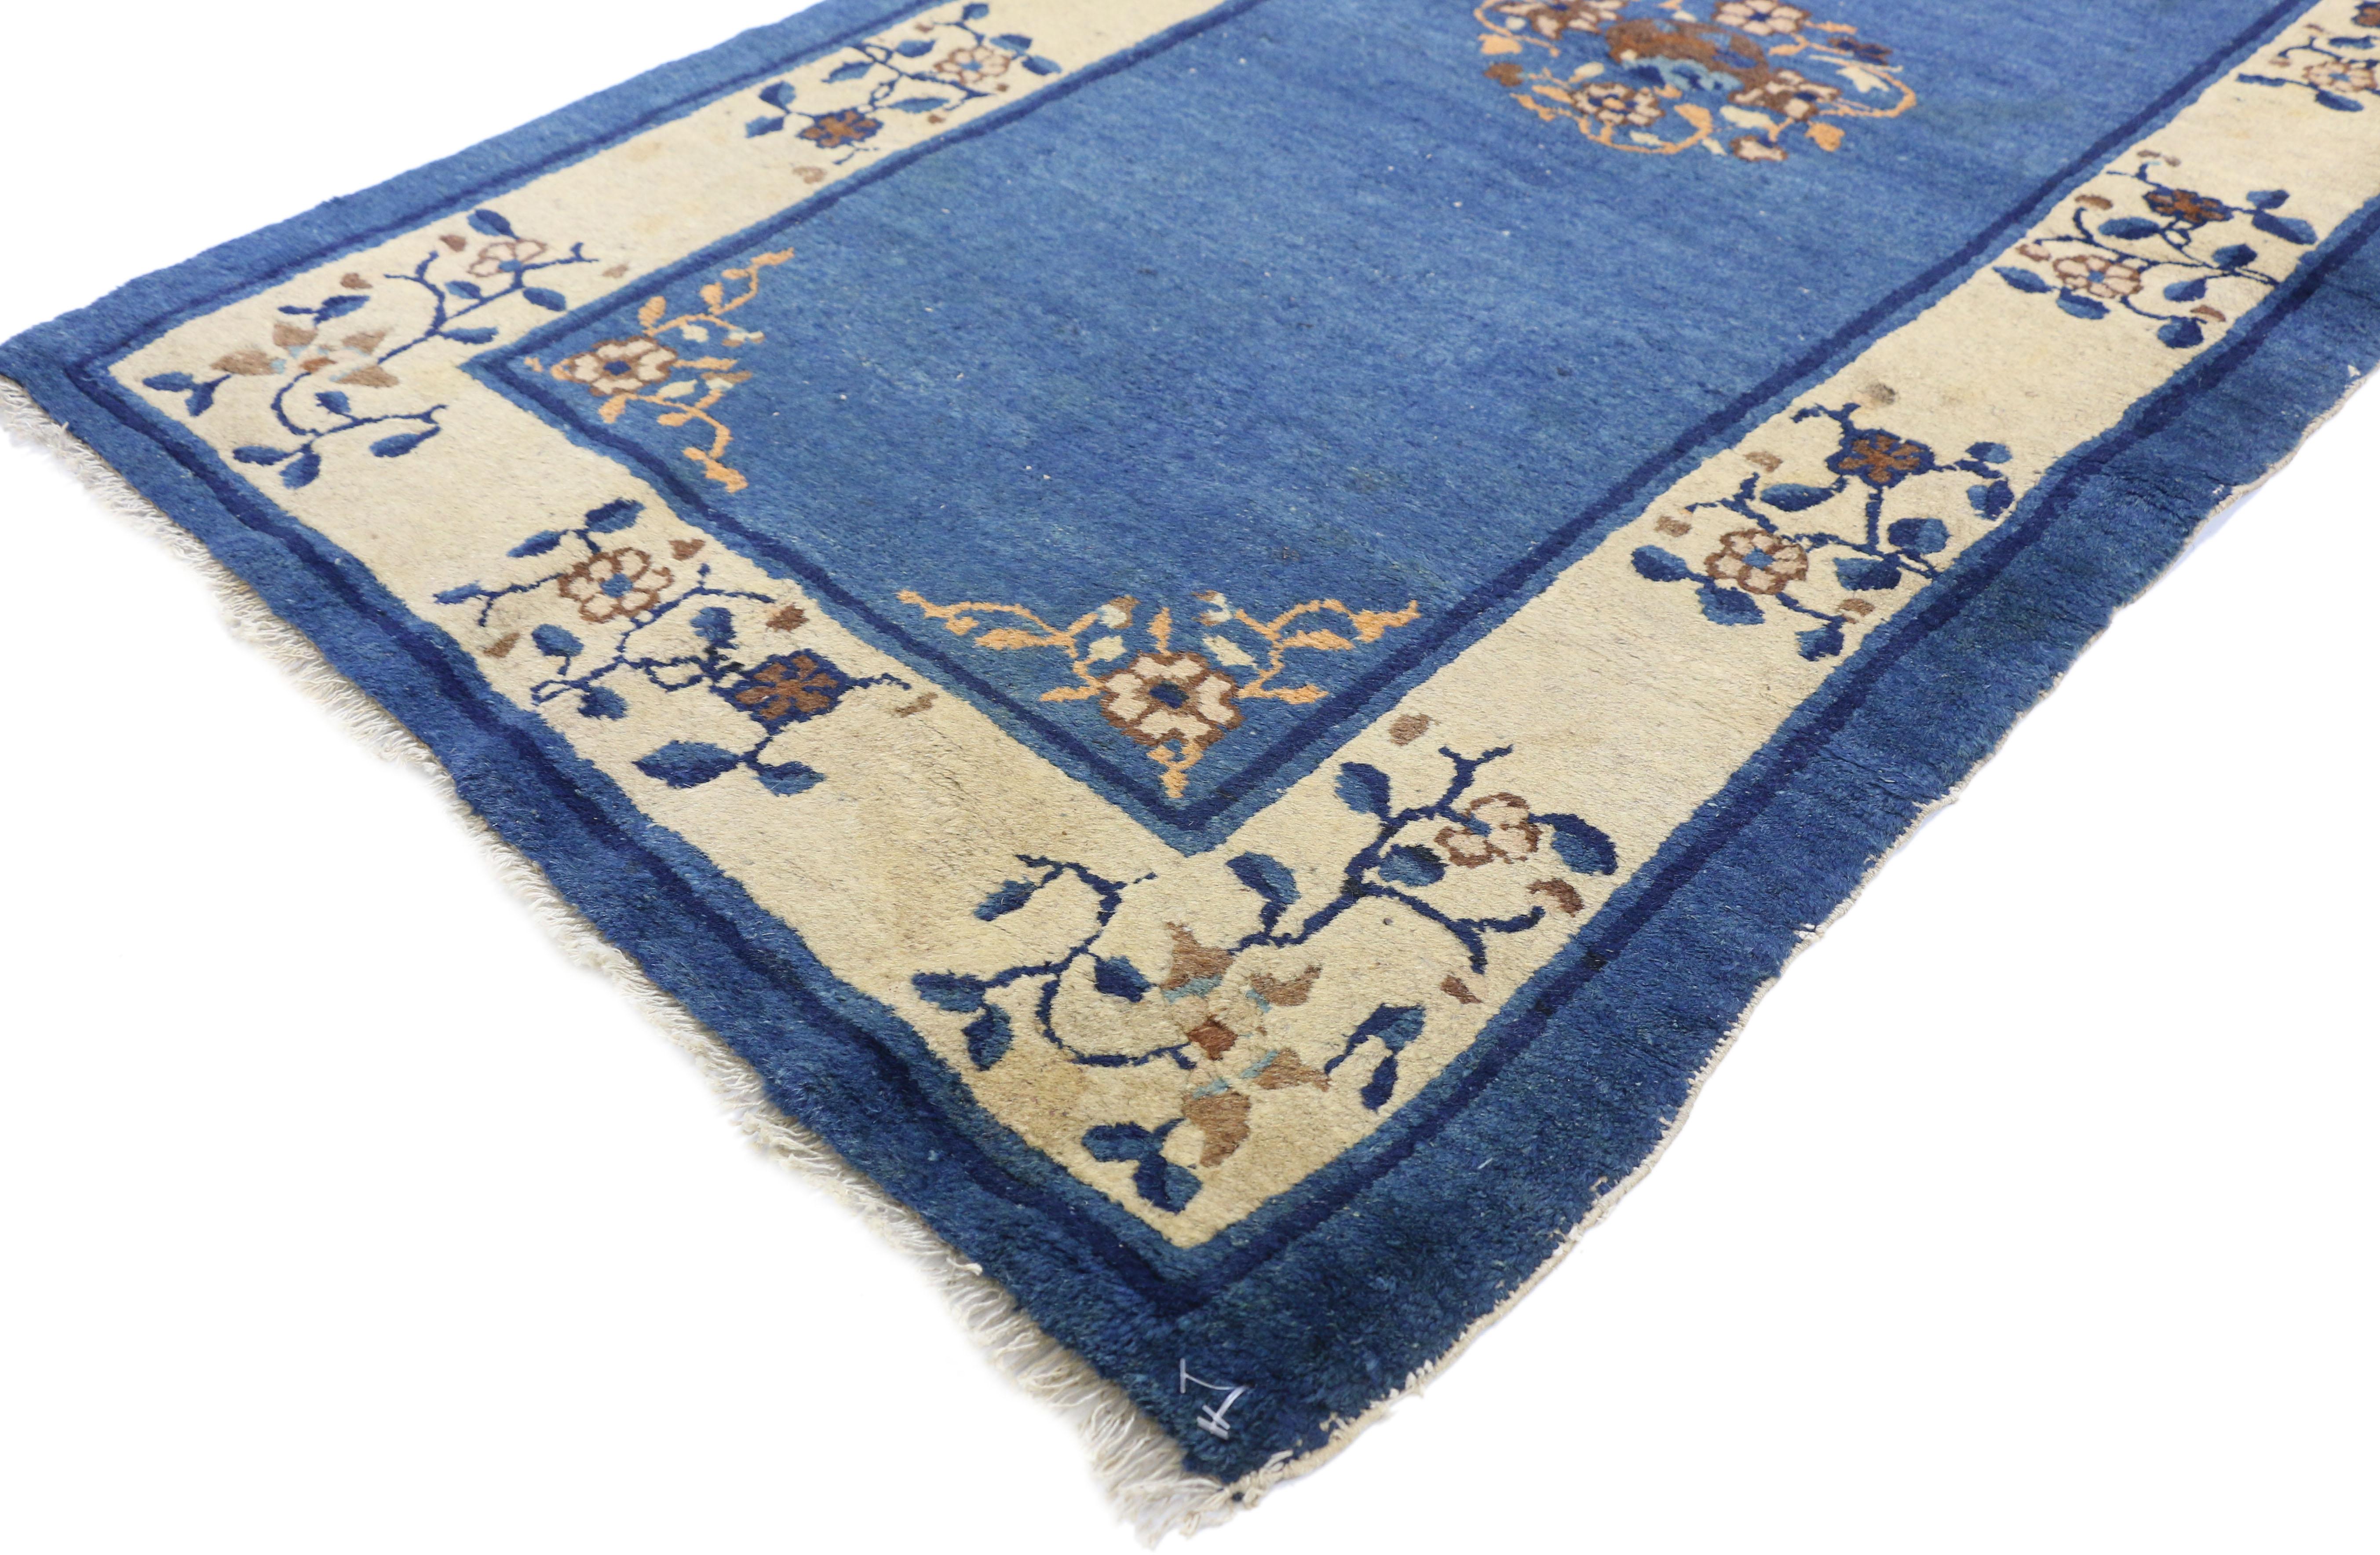 73471 Antique Chinese Peking Accent Rug with Neoclassical Chinoiserie Style 03'00 x 05'09. This hand knotted wool antique Chinese Peking rug features an open center medallion with a swirl of peonies and crabapple blossoms floating in the center of